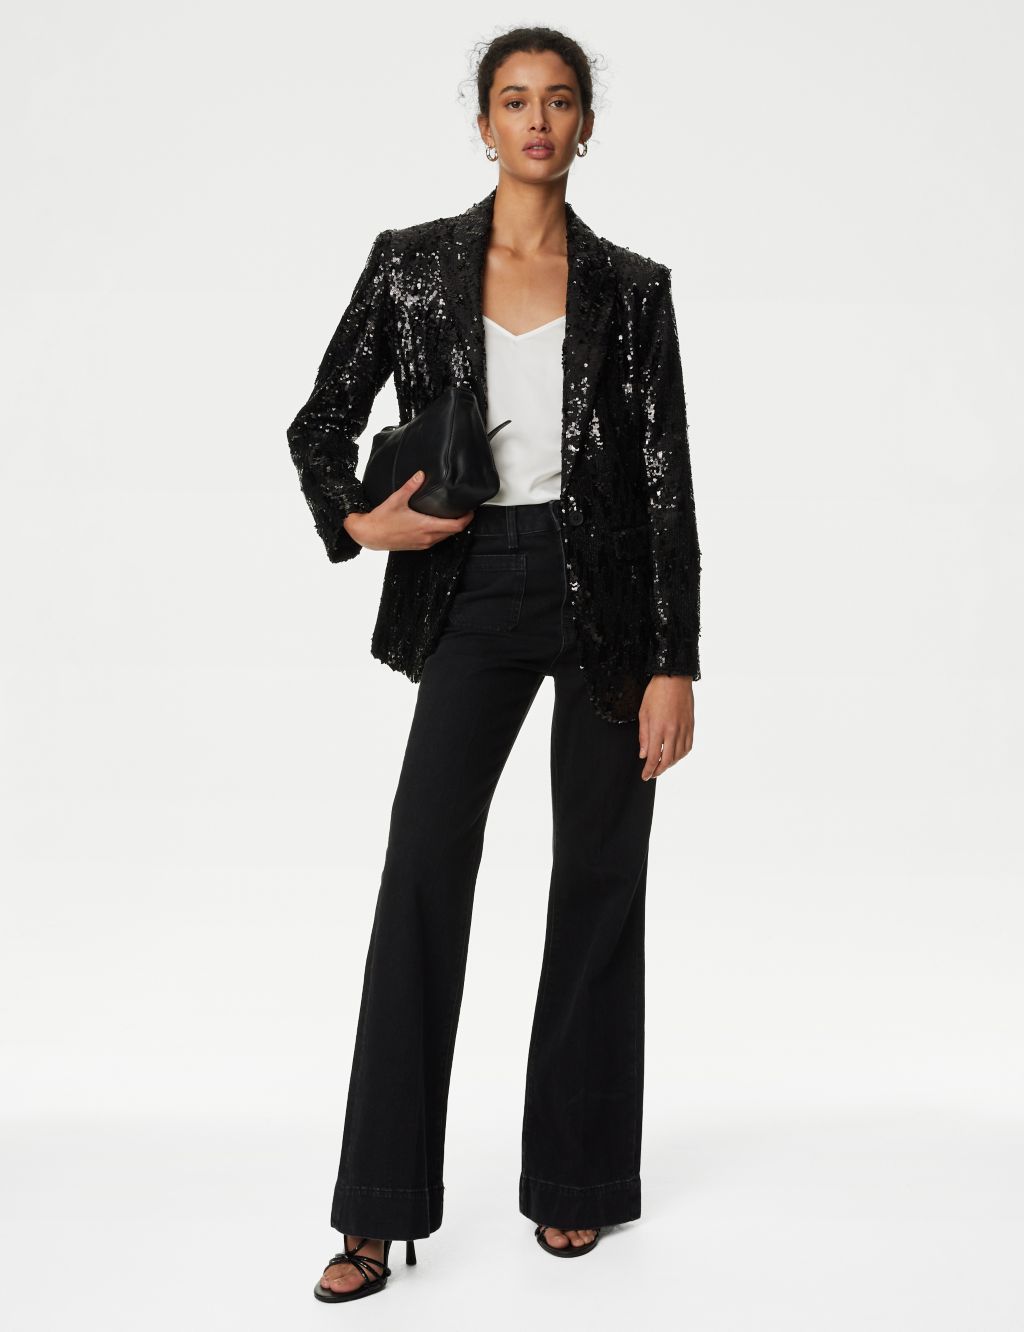 Tailored Sequin Single Breasted Blazer image 7